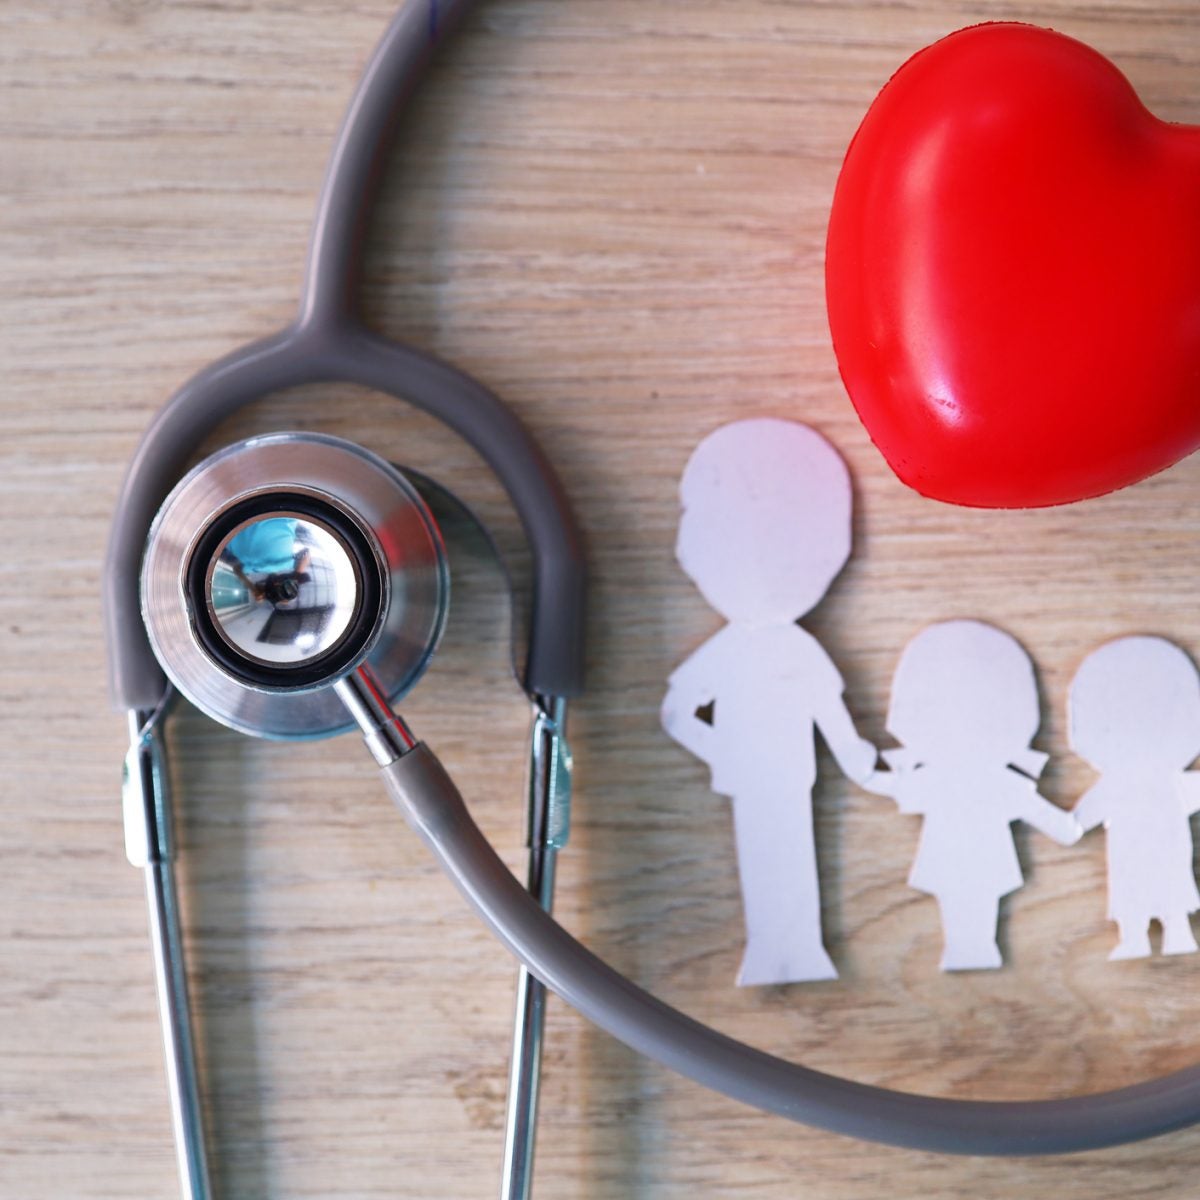 Has Your Family's Medical History Put You At Risk For Heart Disease?